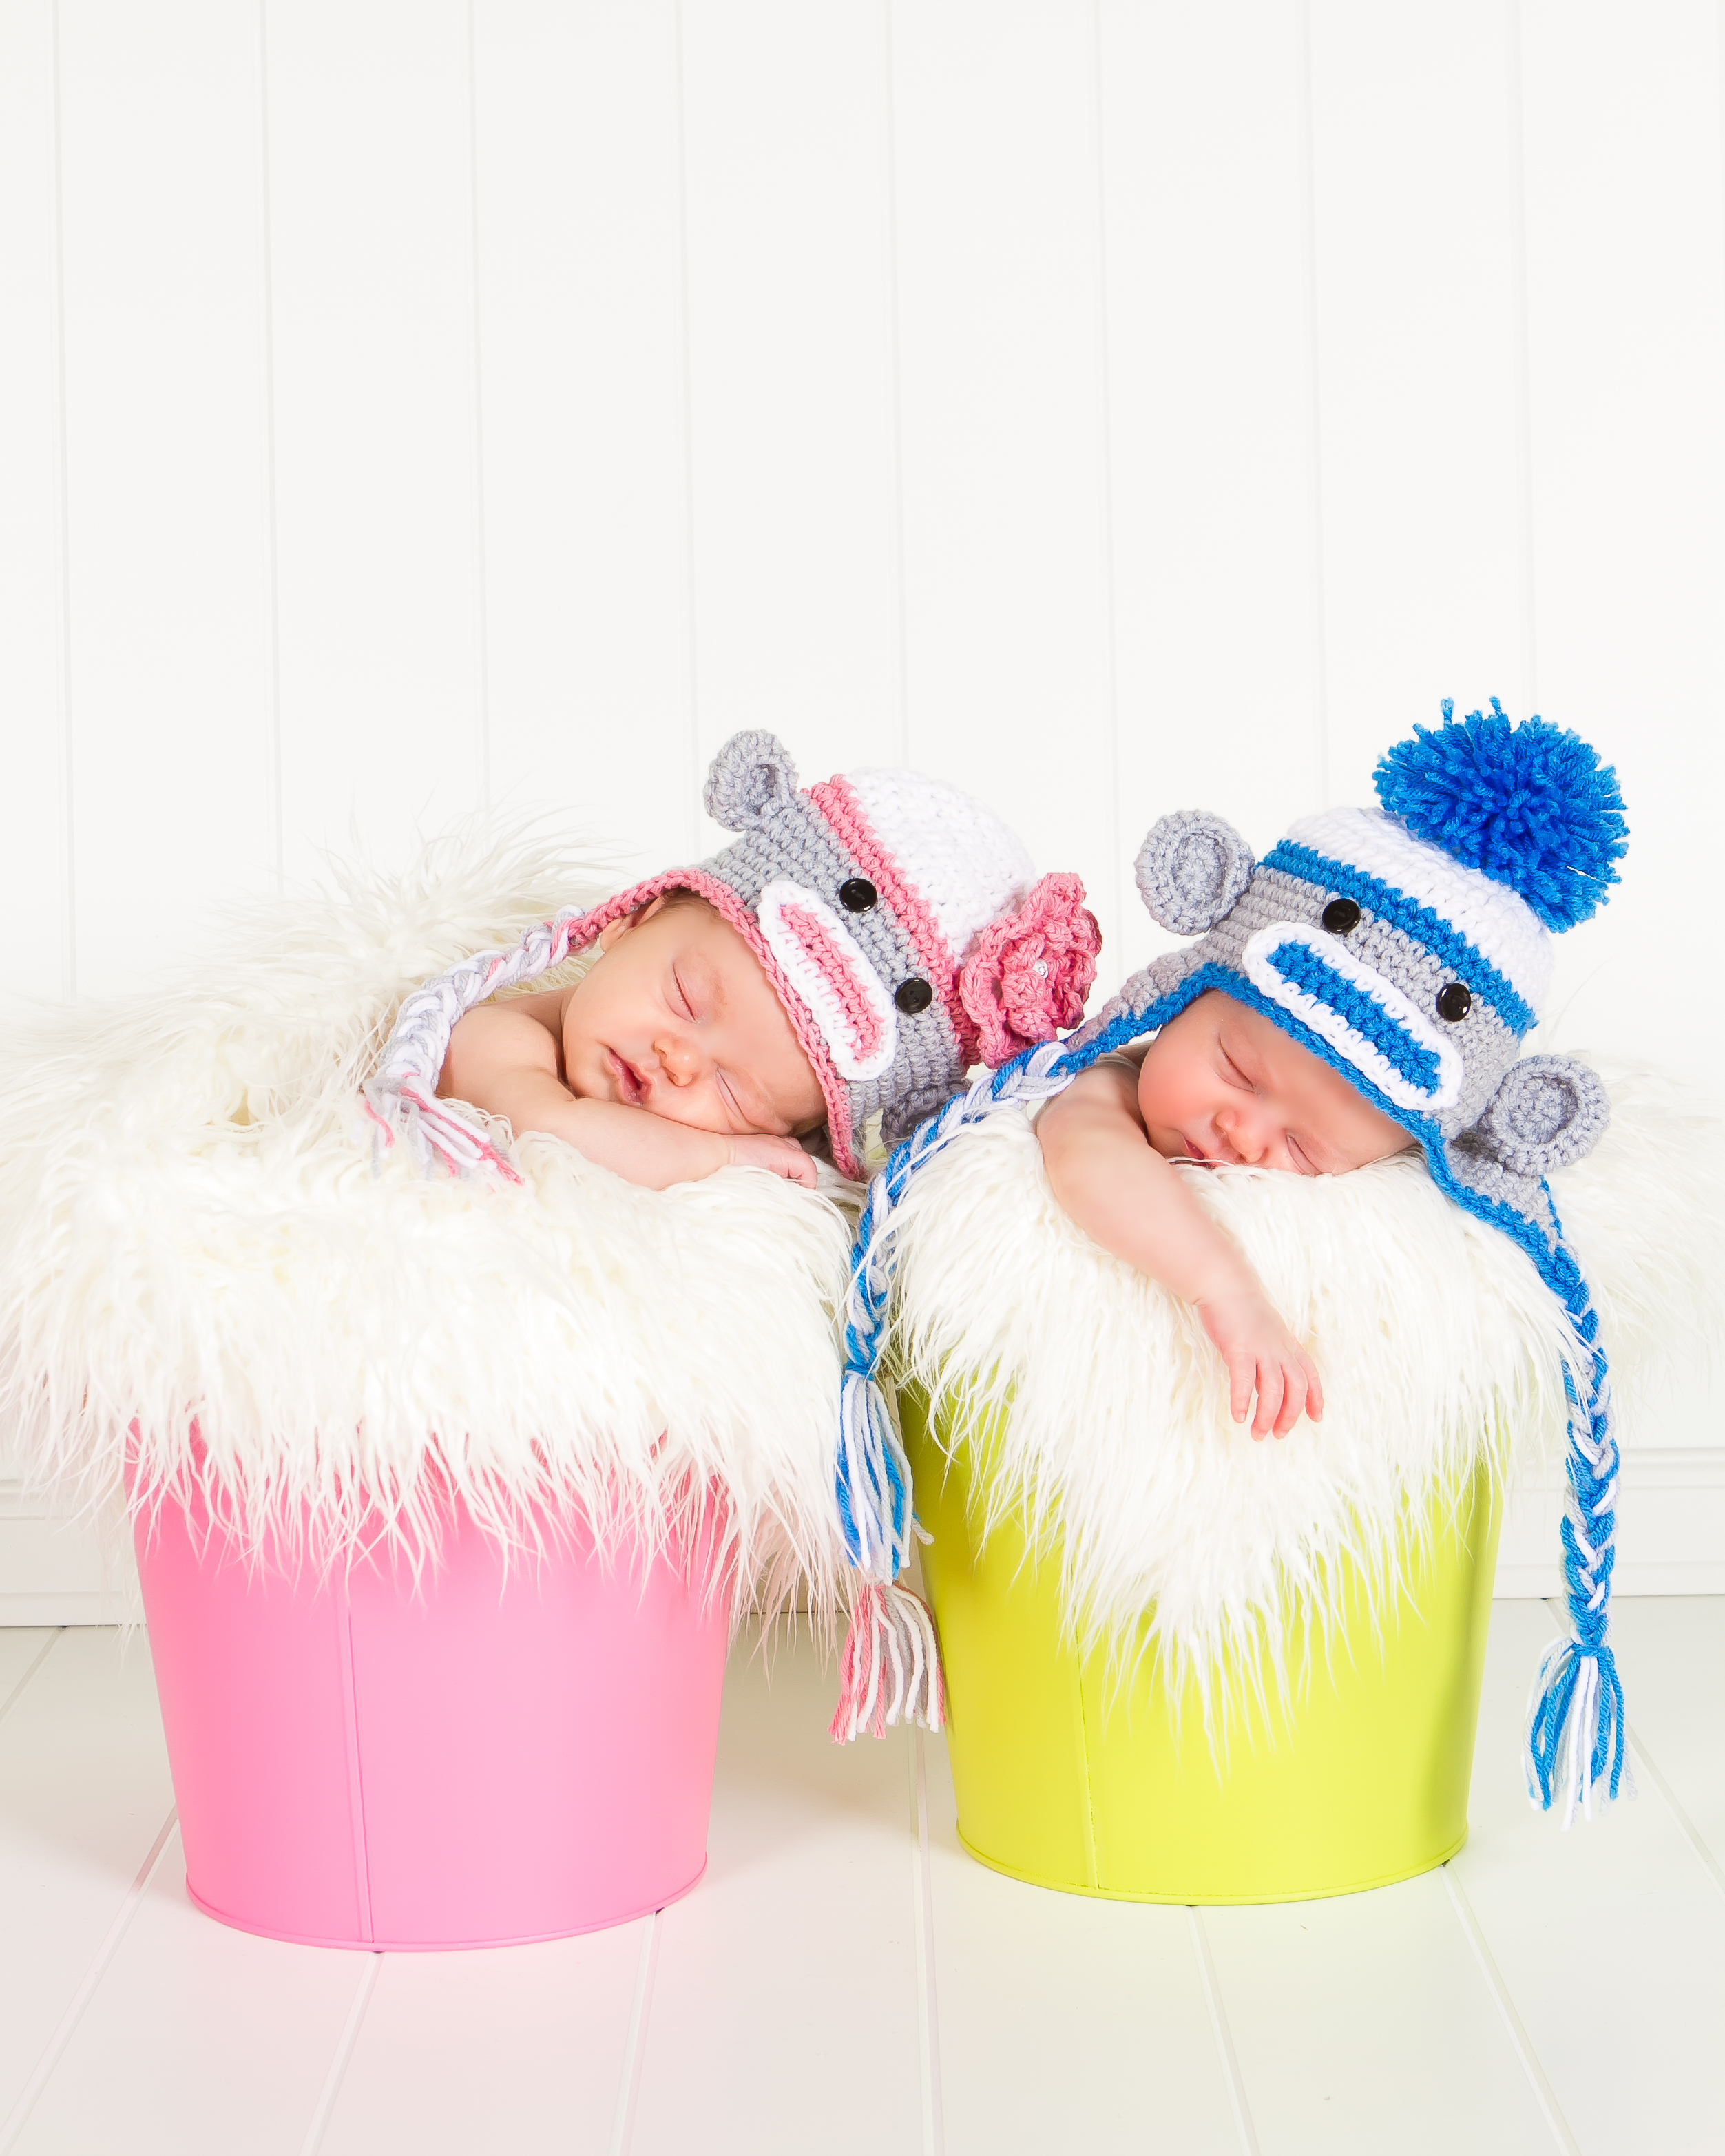 Roseville Newborn and Twins Photographer, Donna Beck Photography